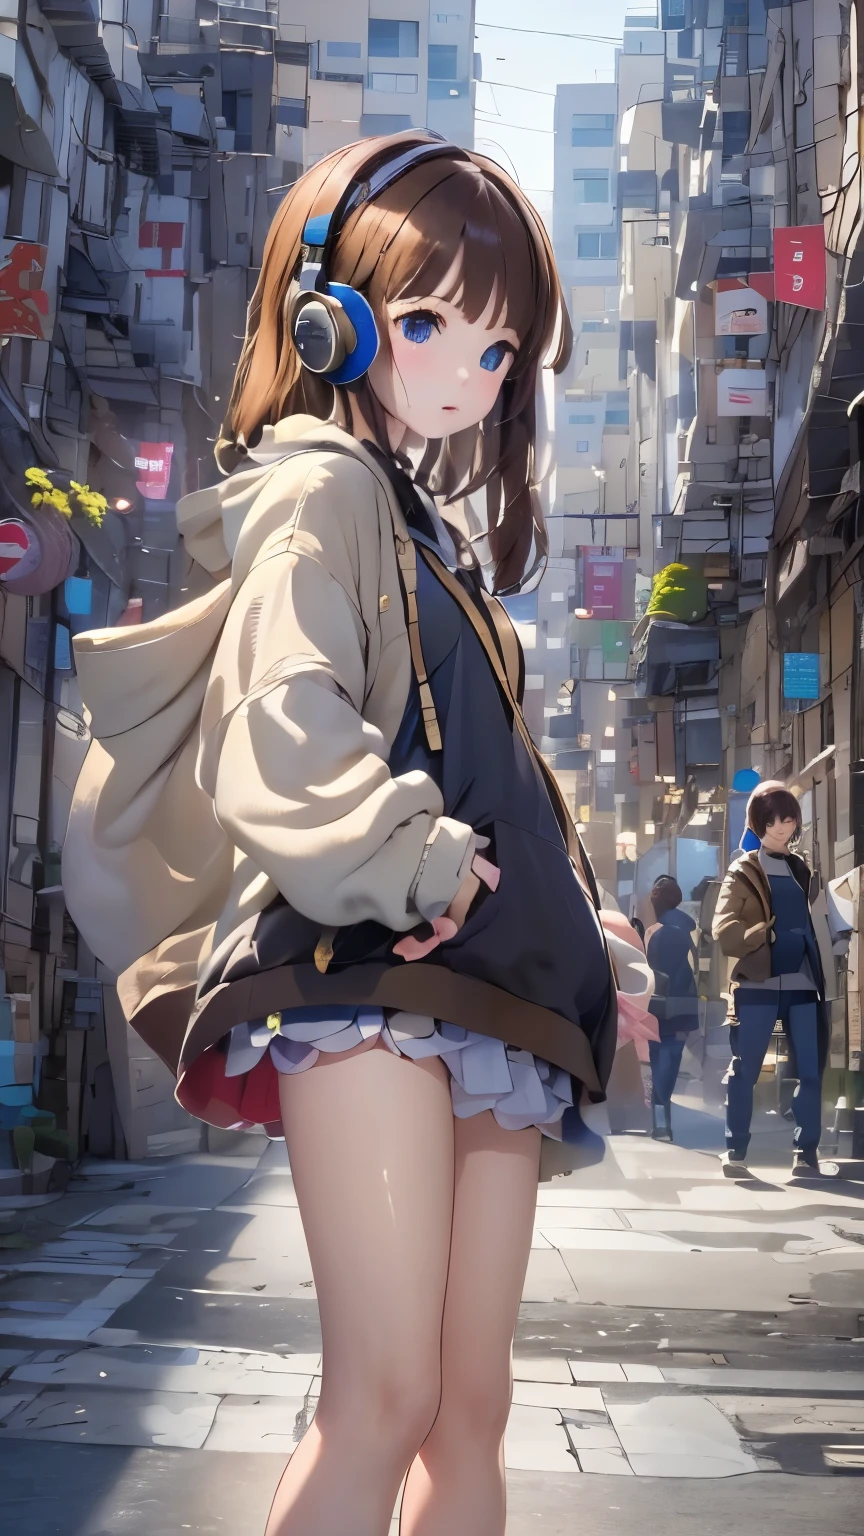 Wearing Sony headphones:1.5、headphone、one girl、Magical girl、perfect anatomy、small face、plump lips、brown hair、distinctive hairstyle、look of suspicion、Modern hoodies、knee socks、(((blurred background、street corner、Everyday scenery)))、highest quality、High resolution、High resolution、cinematic lighting、professional photographer